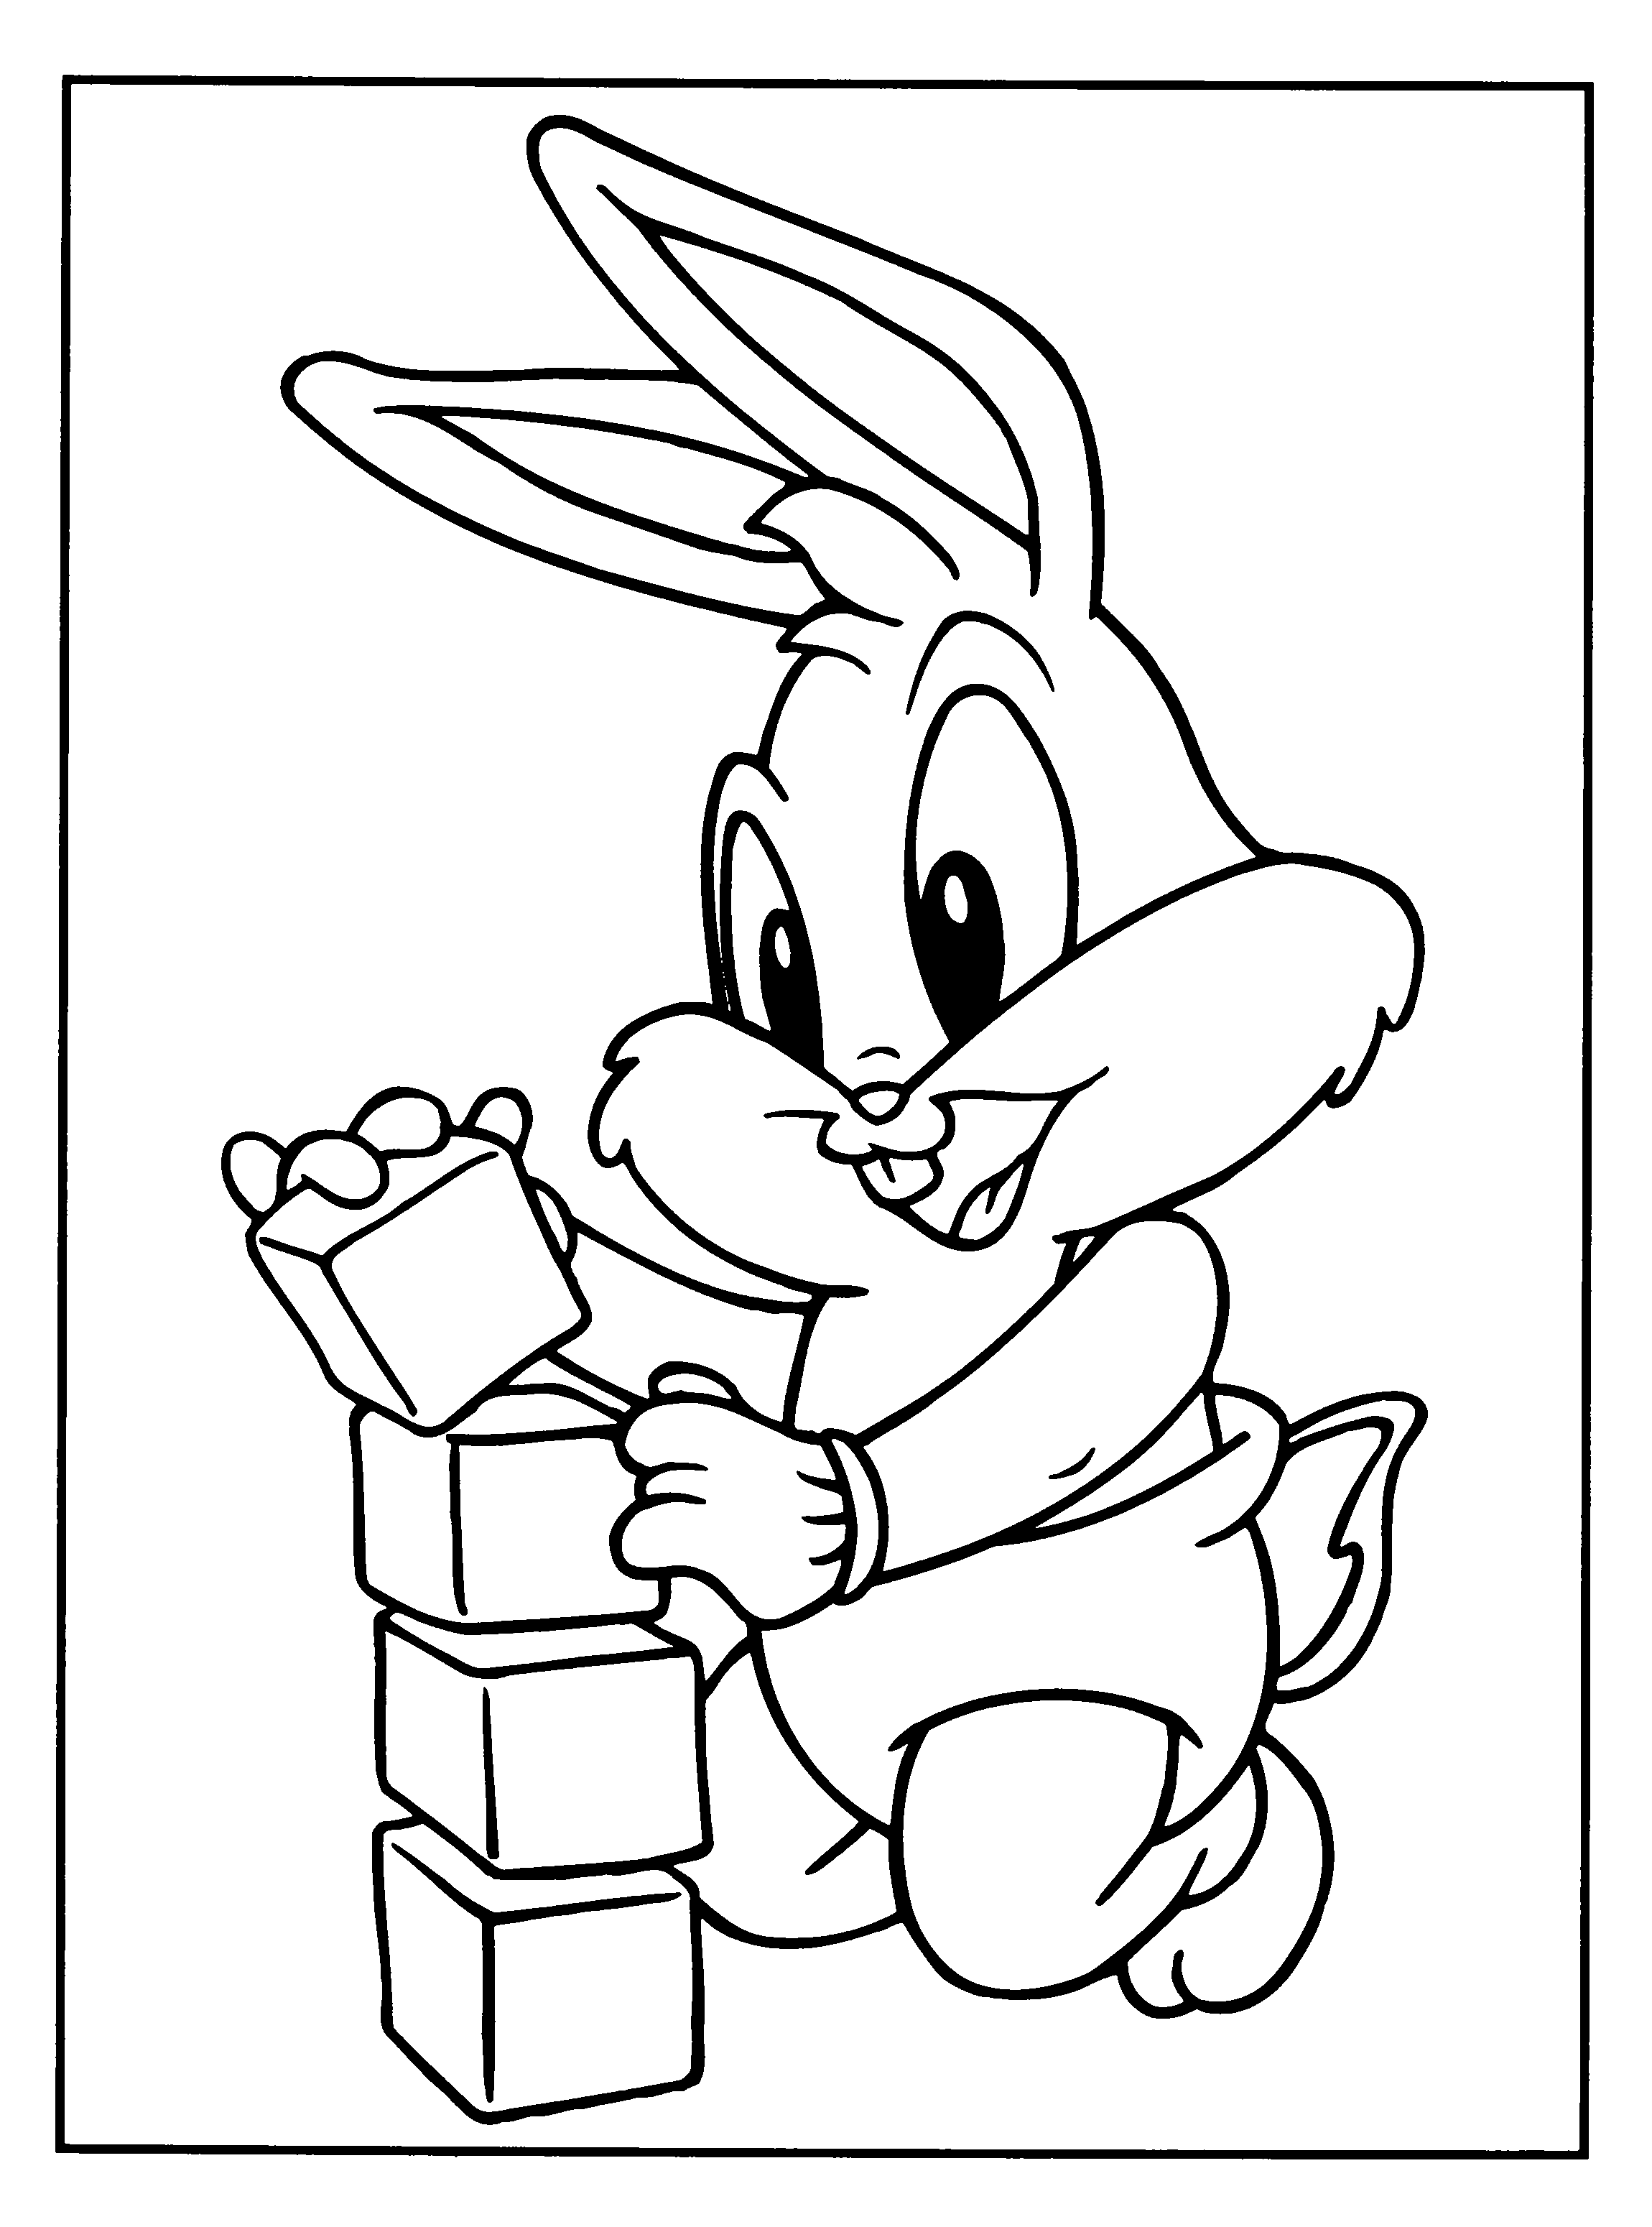 animated-coloring-pages-looney-tunes-image-0019